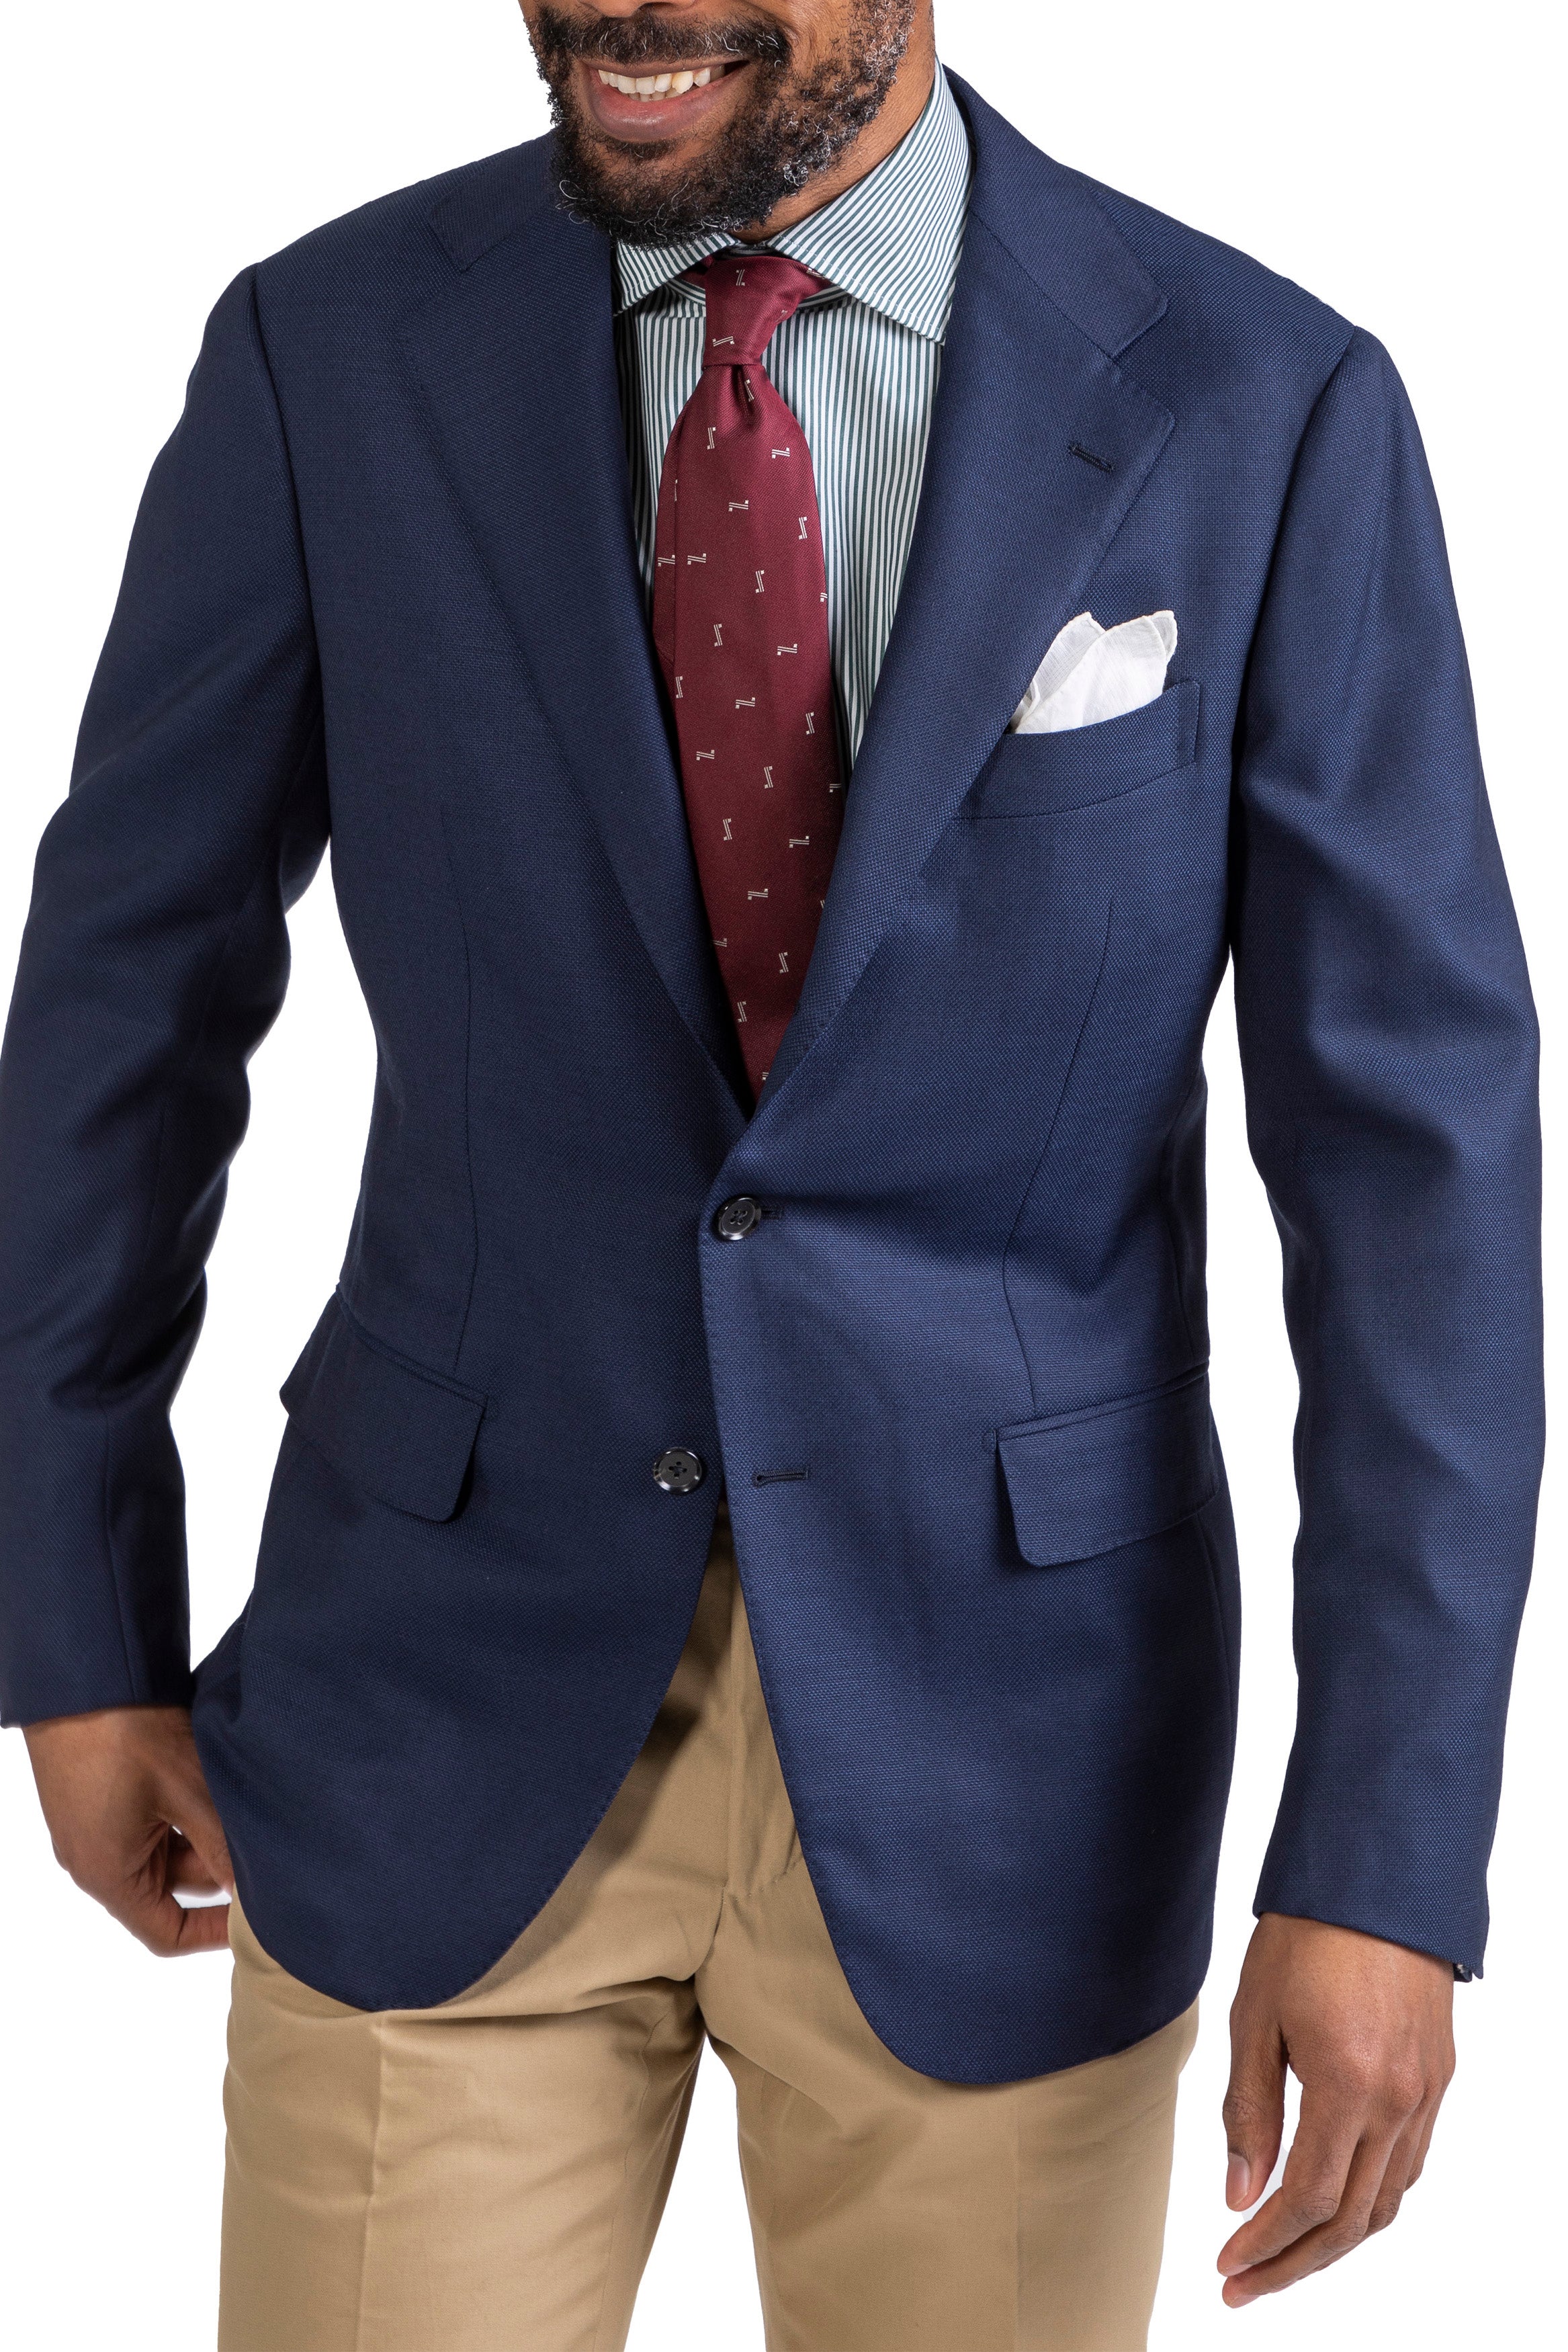 The Armoury Model 3 Blue Dormeuil Wool Sport Coat